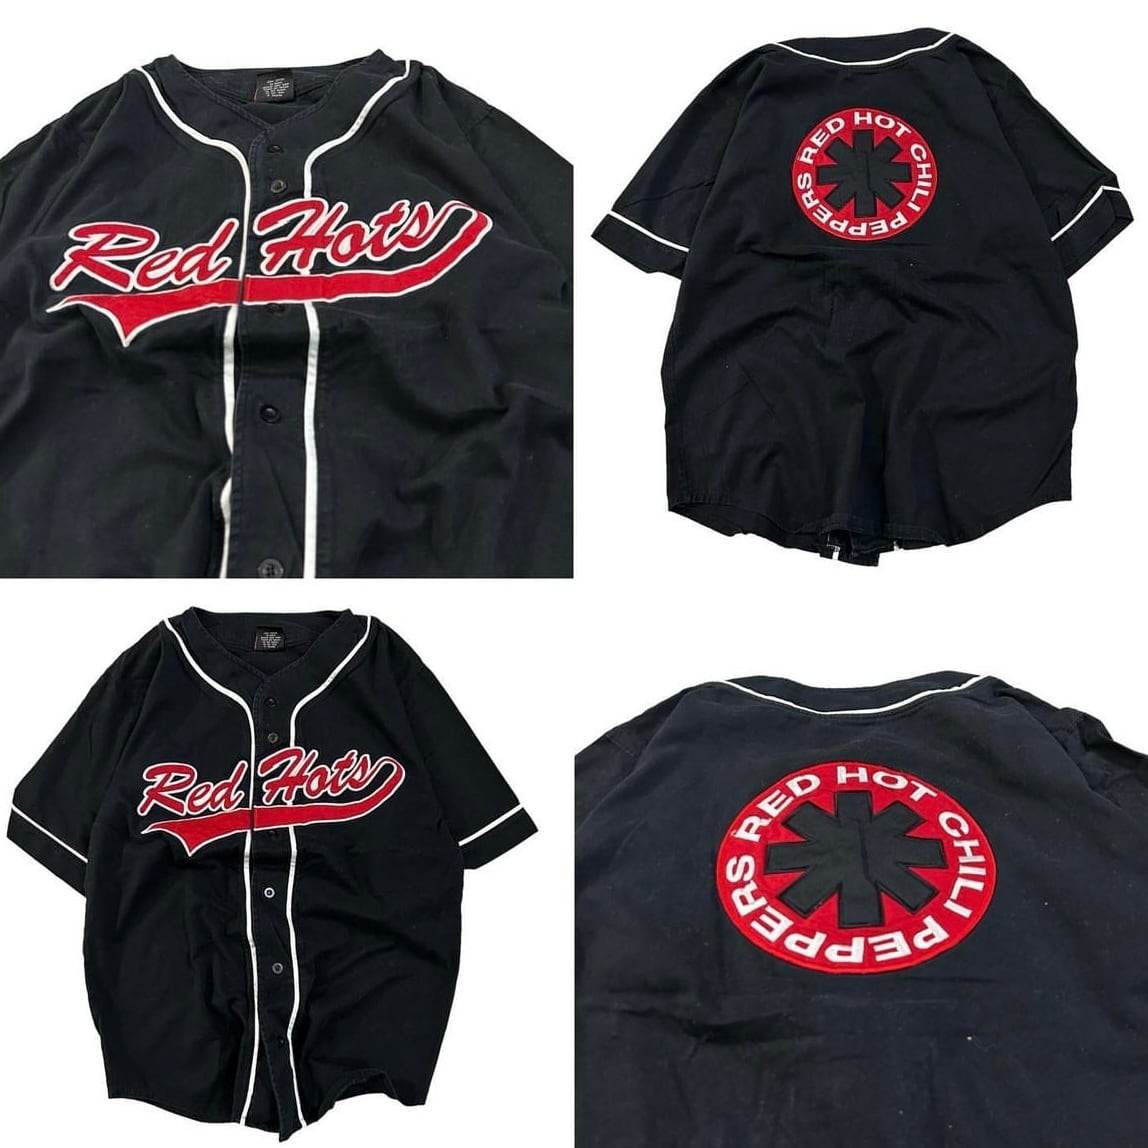 size:M【 Red Hot Chili Peppers 】レッドホットチリペッパーズ ...